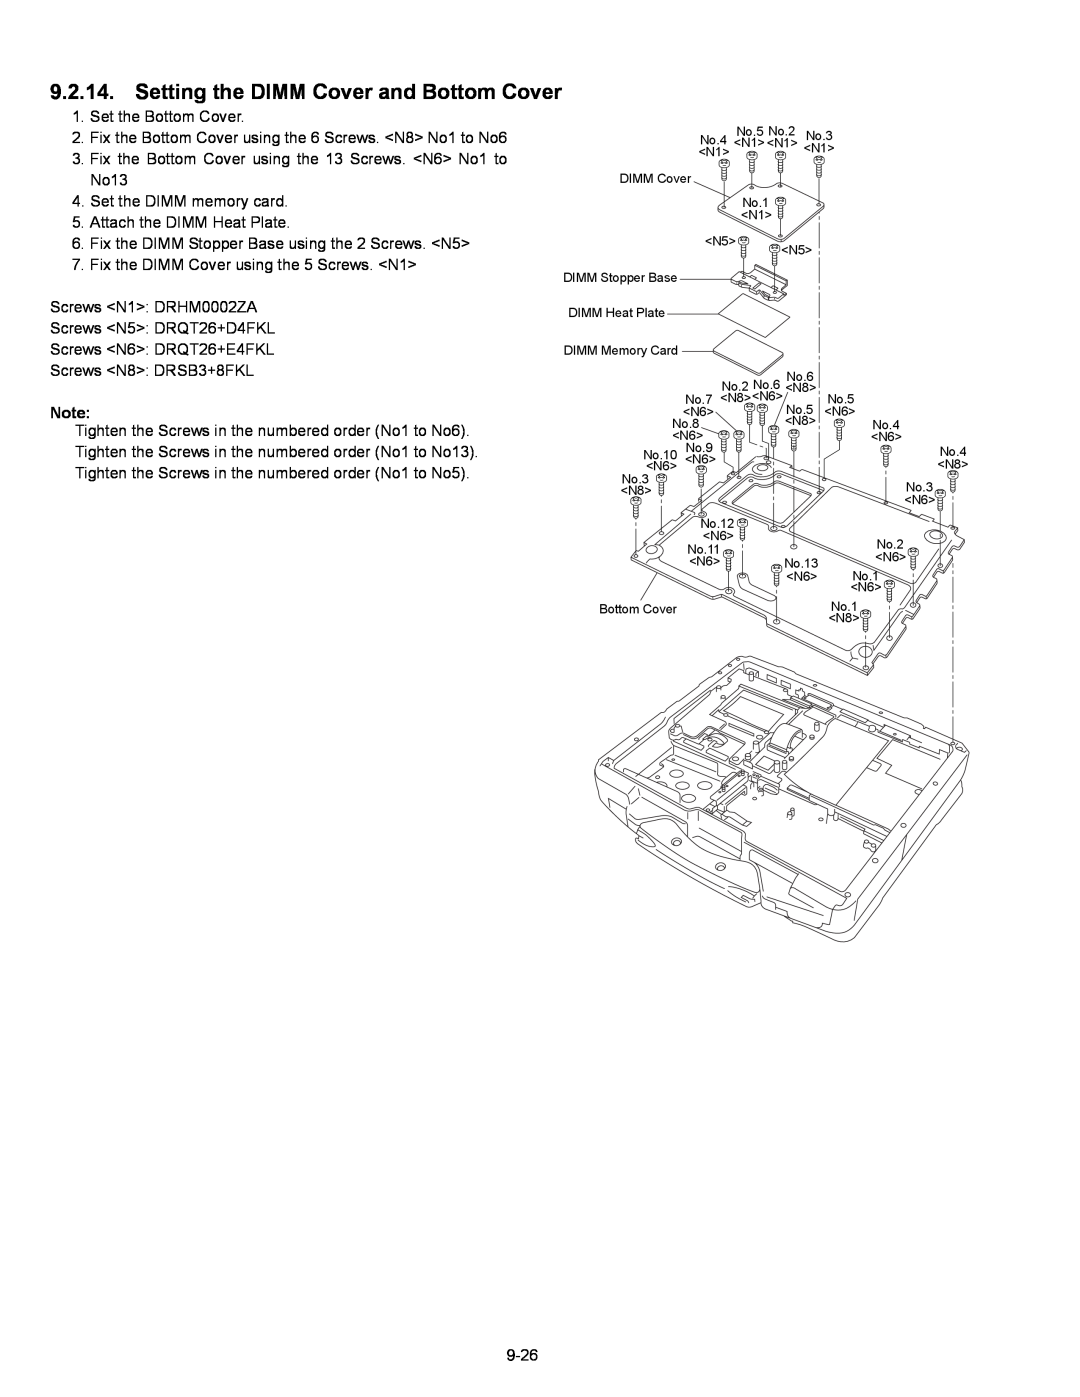 Matsushita CF-30 service manual Setting the DIMM Cover and Bottom Cover 